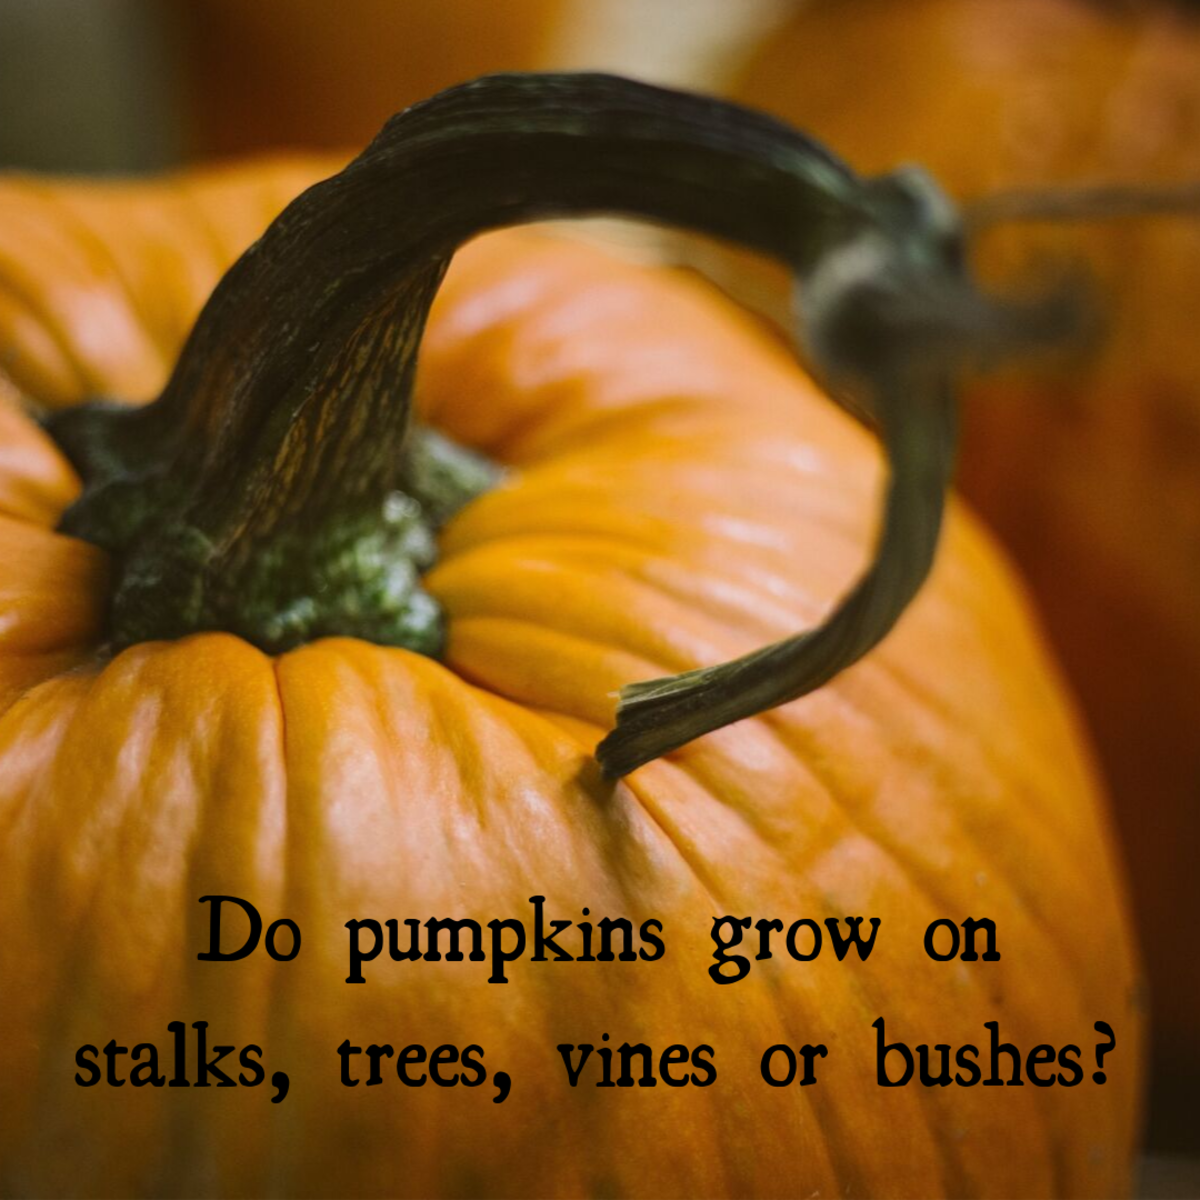 What do pumpkins grow on—stalks, trees, vines or bushes? Answer: vines.